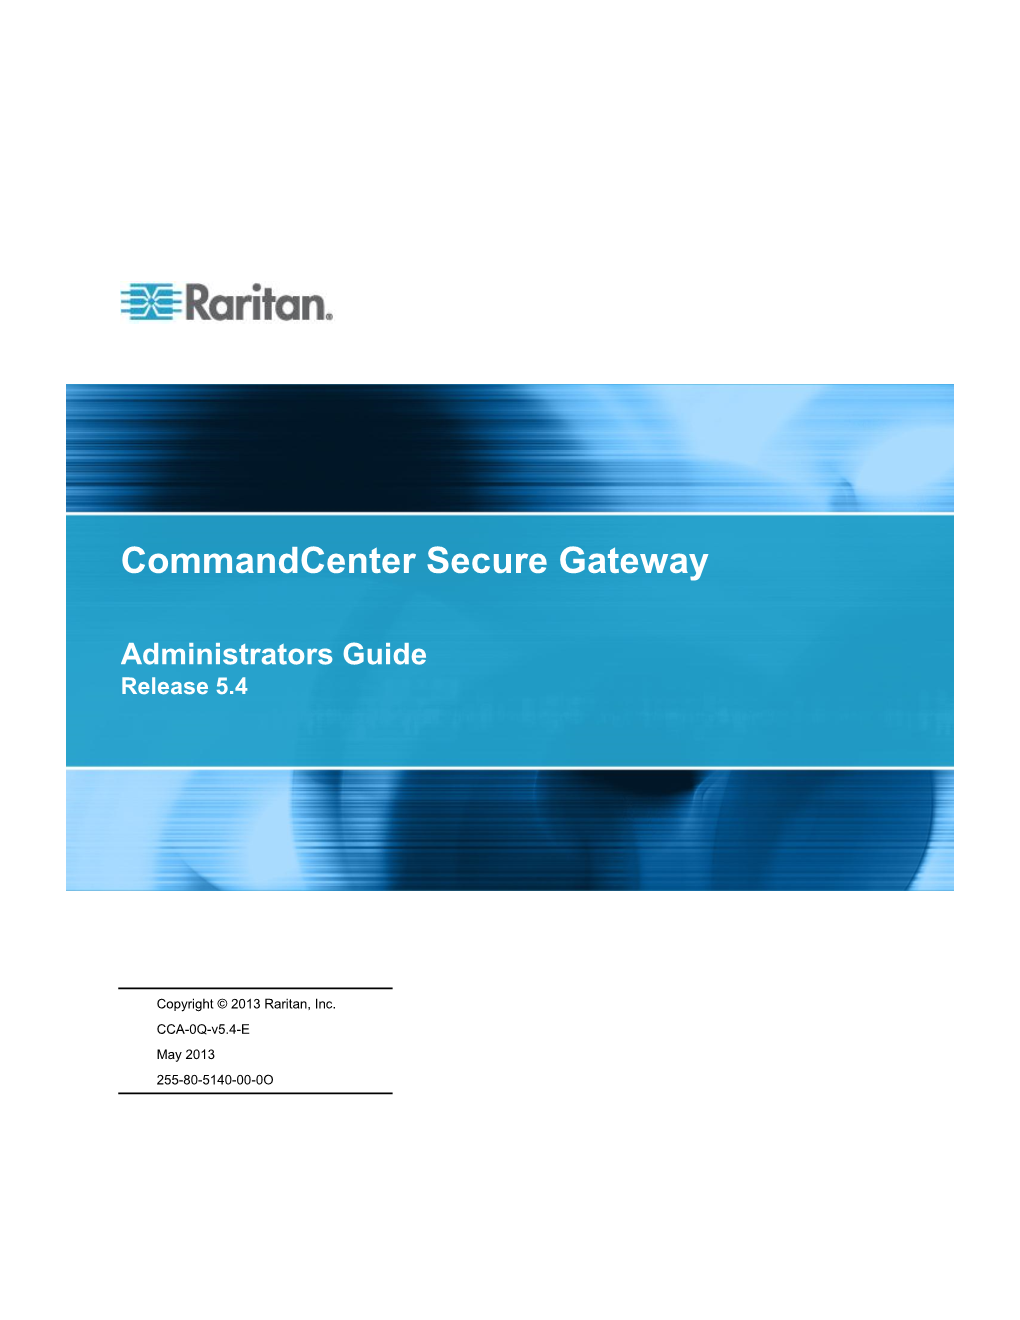 Commandcenter Secure Gateway Administrators Guide Based on Enhancements and Changes to the Equipment And/Or Documentation